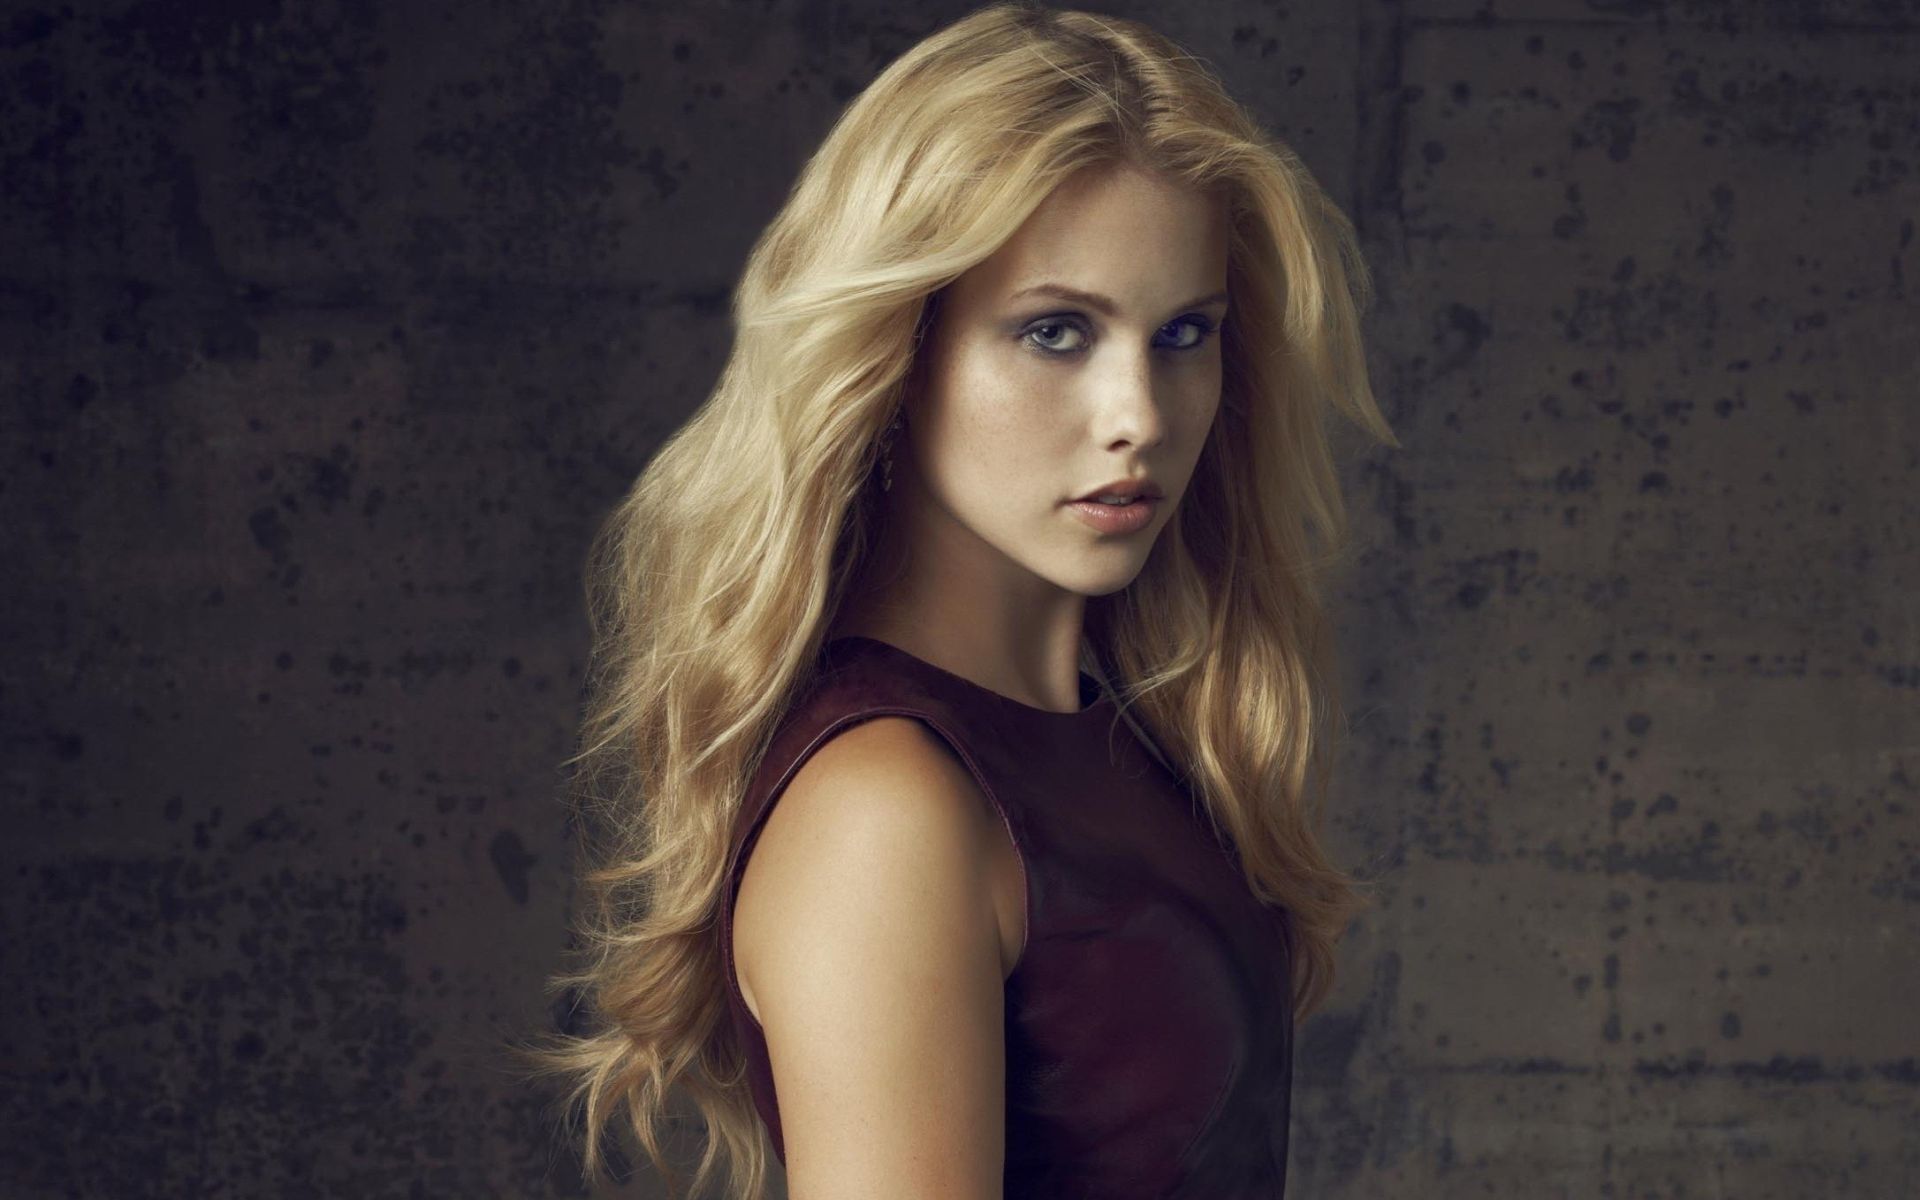 Claire Holt's Spouse And Relationship History